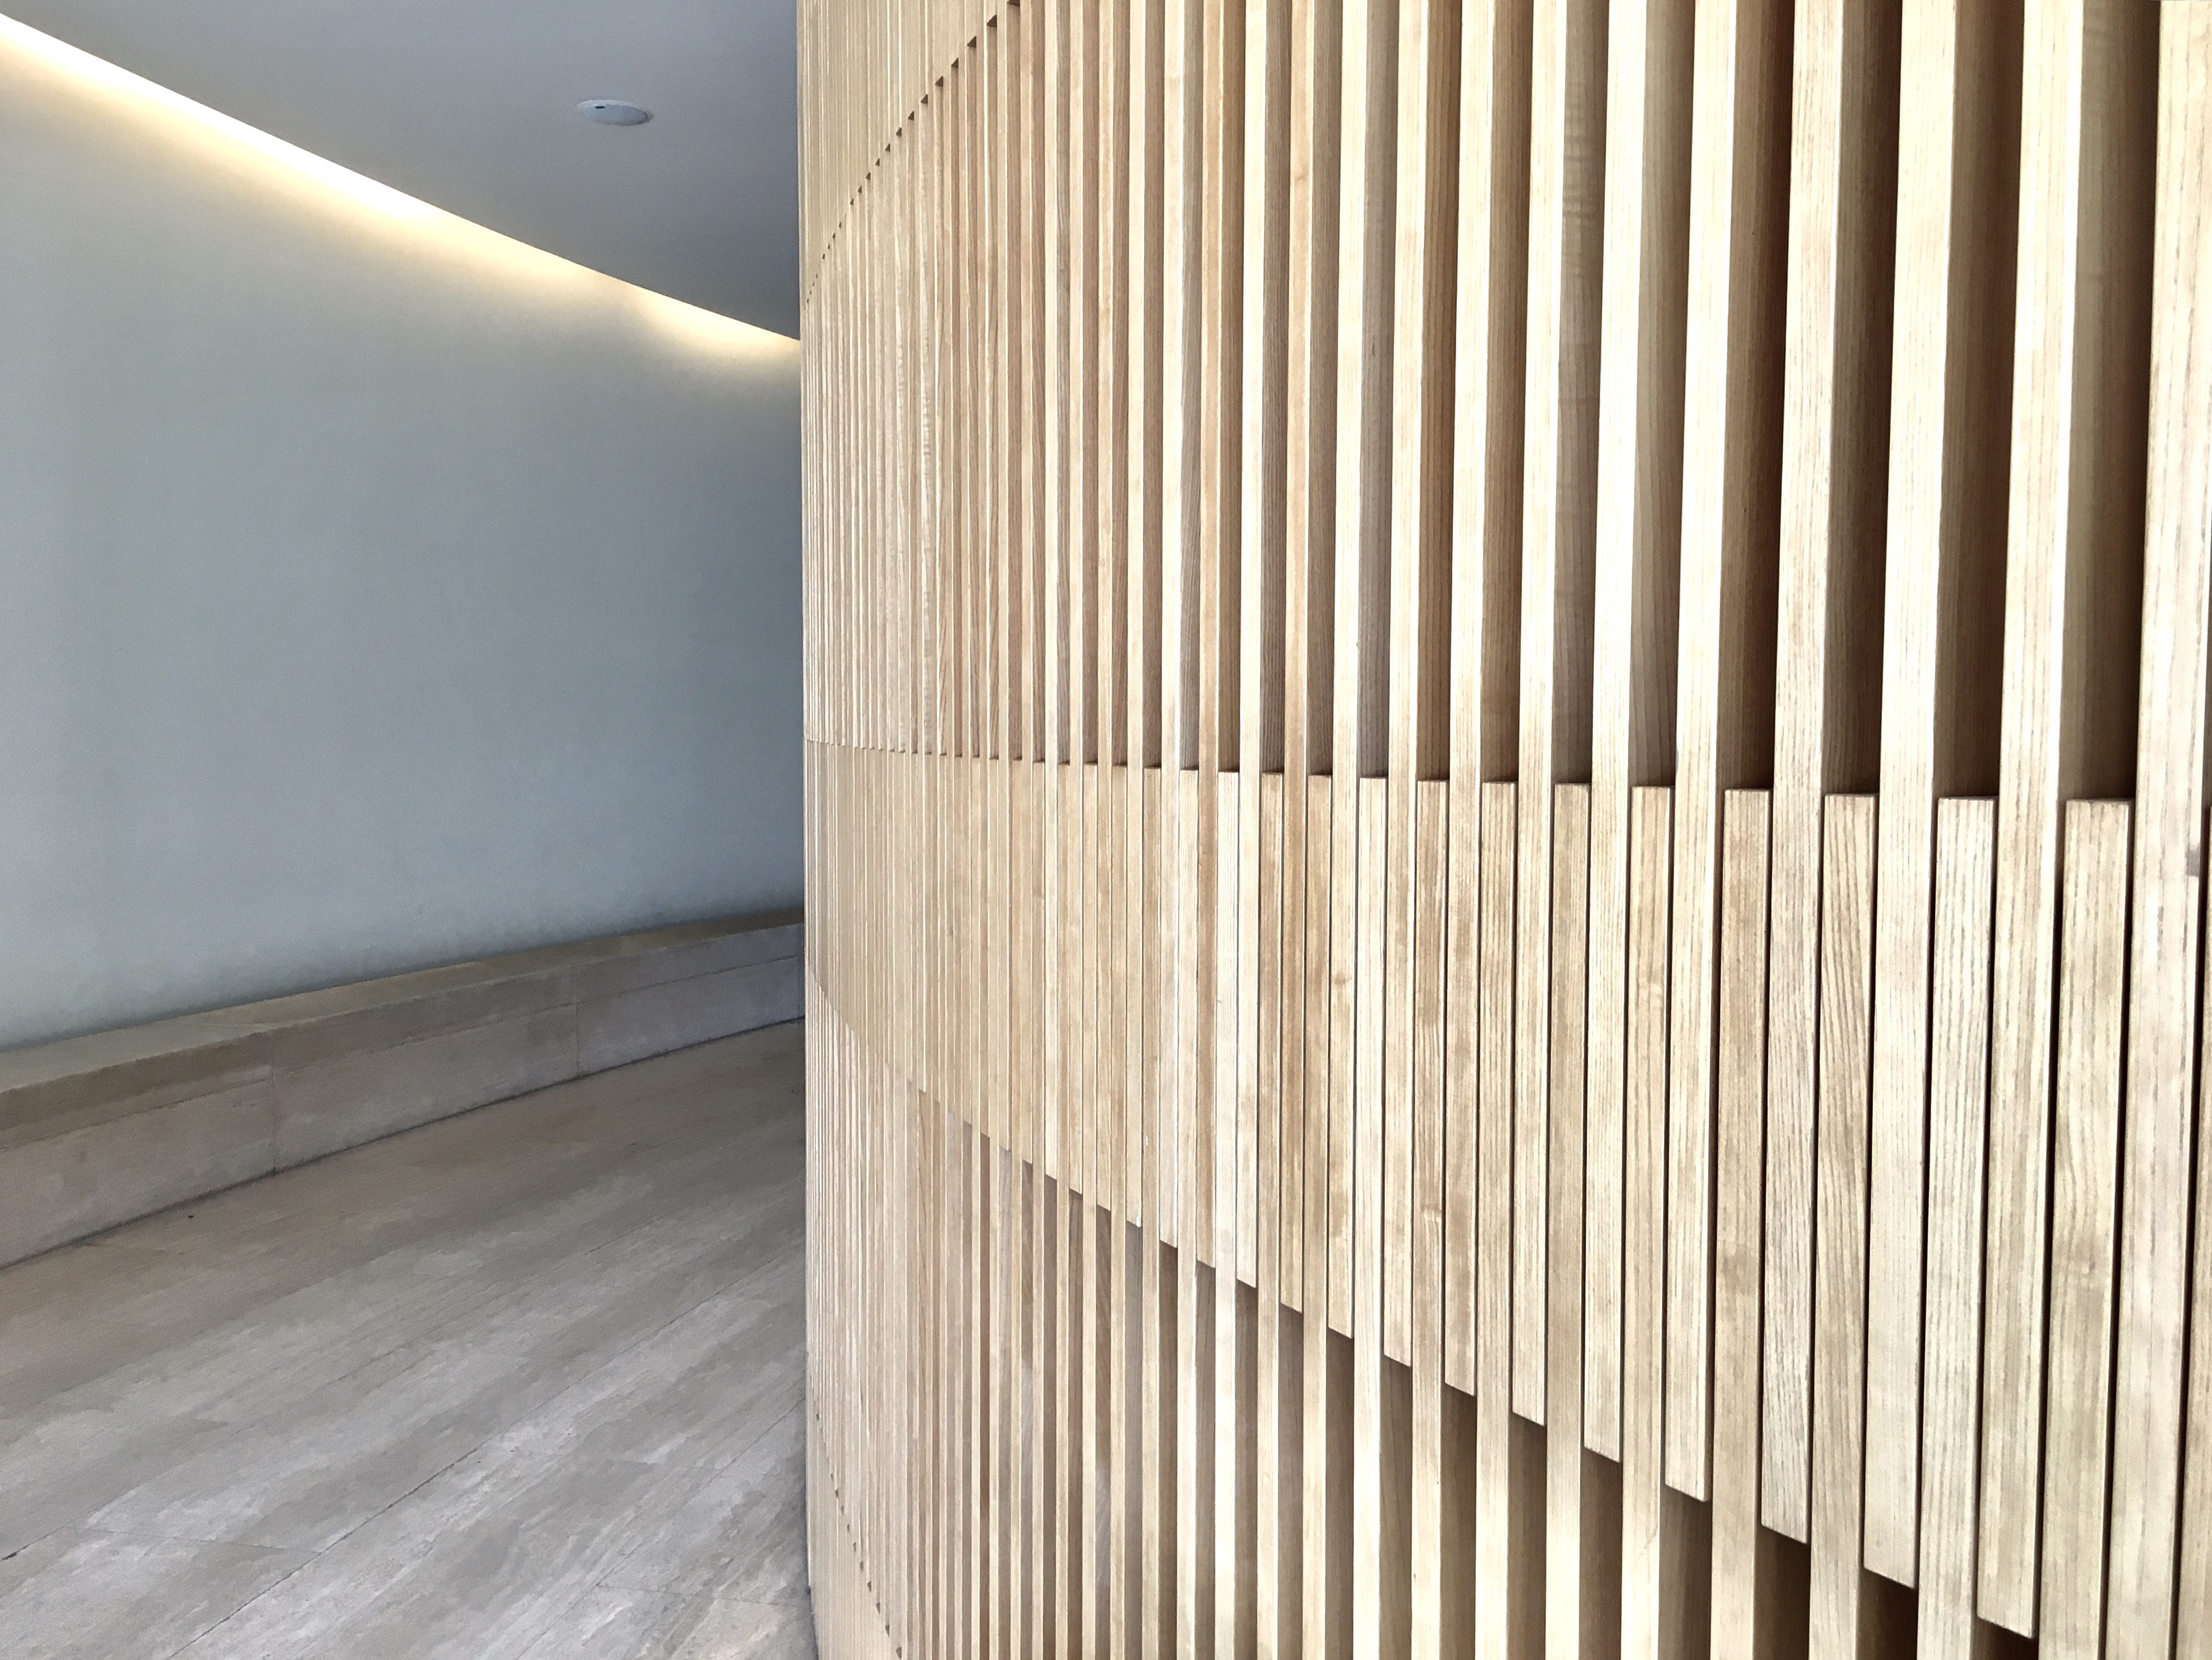 Close-up of Wooden Walls, Architecture, Business, Design, Hallway, HQ Photo